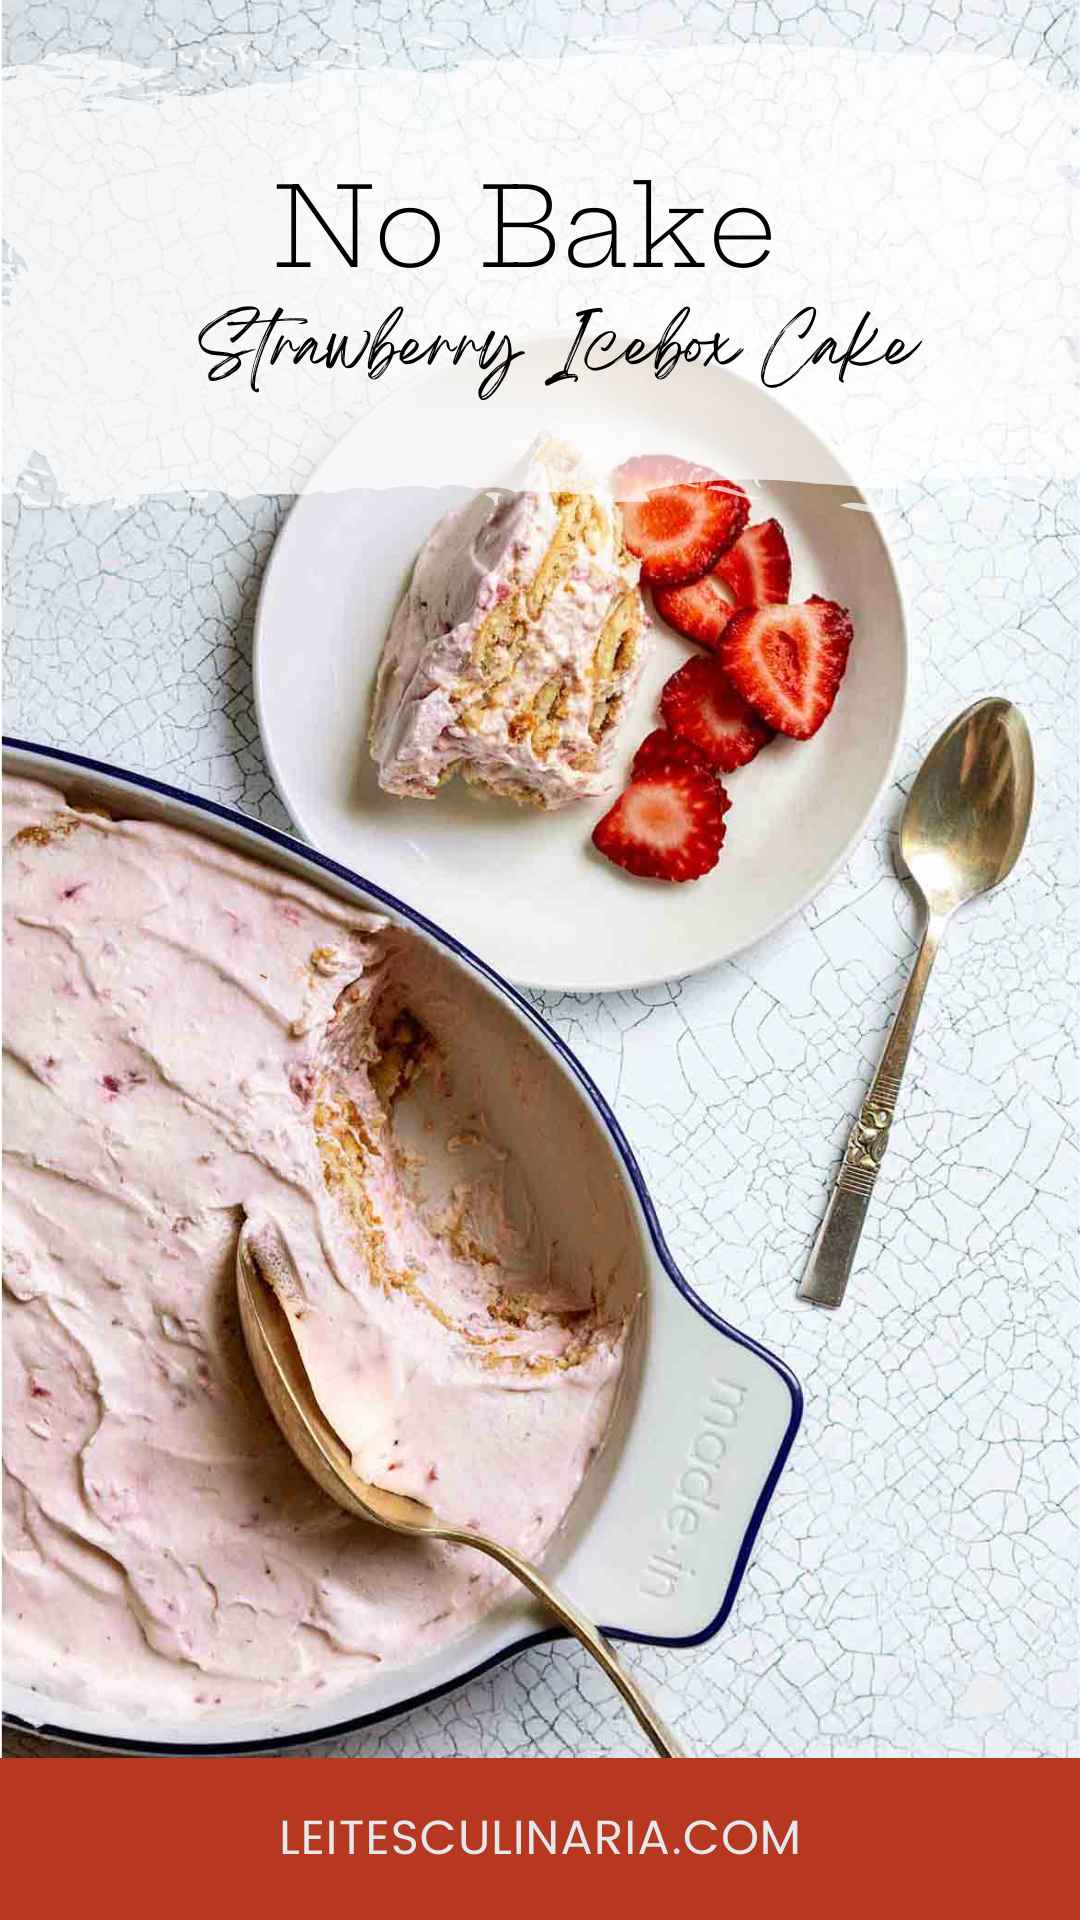 A oval dish filled with strawberry icebox cake with a serving on a plate next to it.